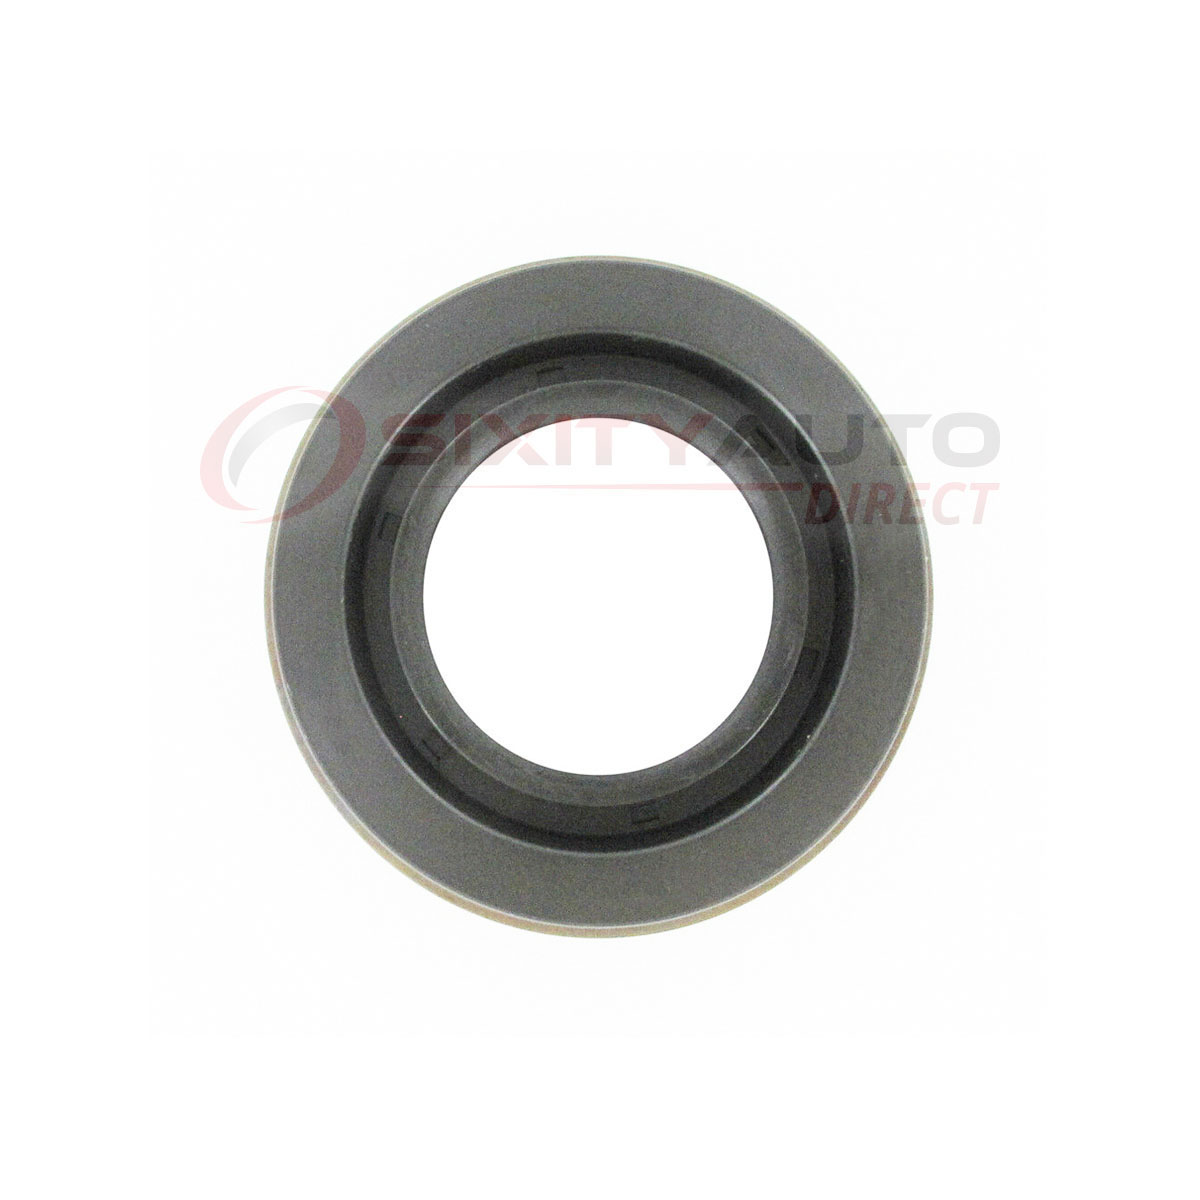 SKF Differential Pinion Seal for 2002-2010 Dodge Ram 1500 3.7L 3.9L 4 2007 Dodge Ram 1500 Pinion Seal Replacement